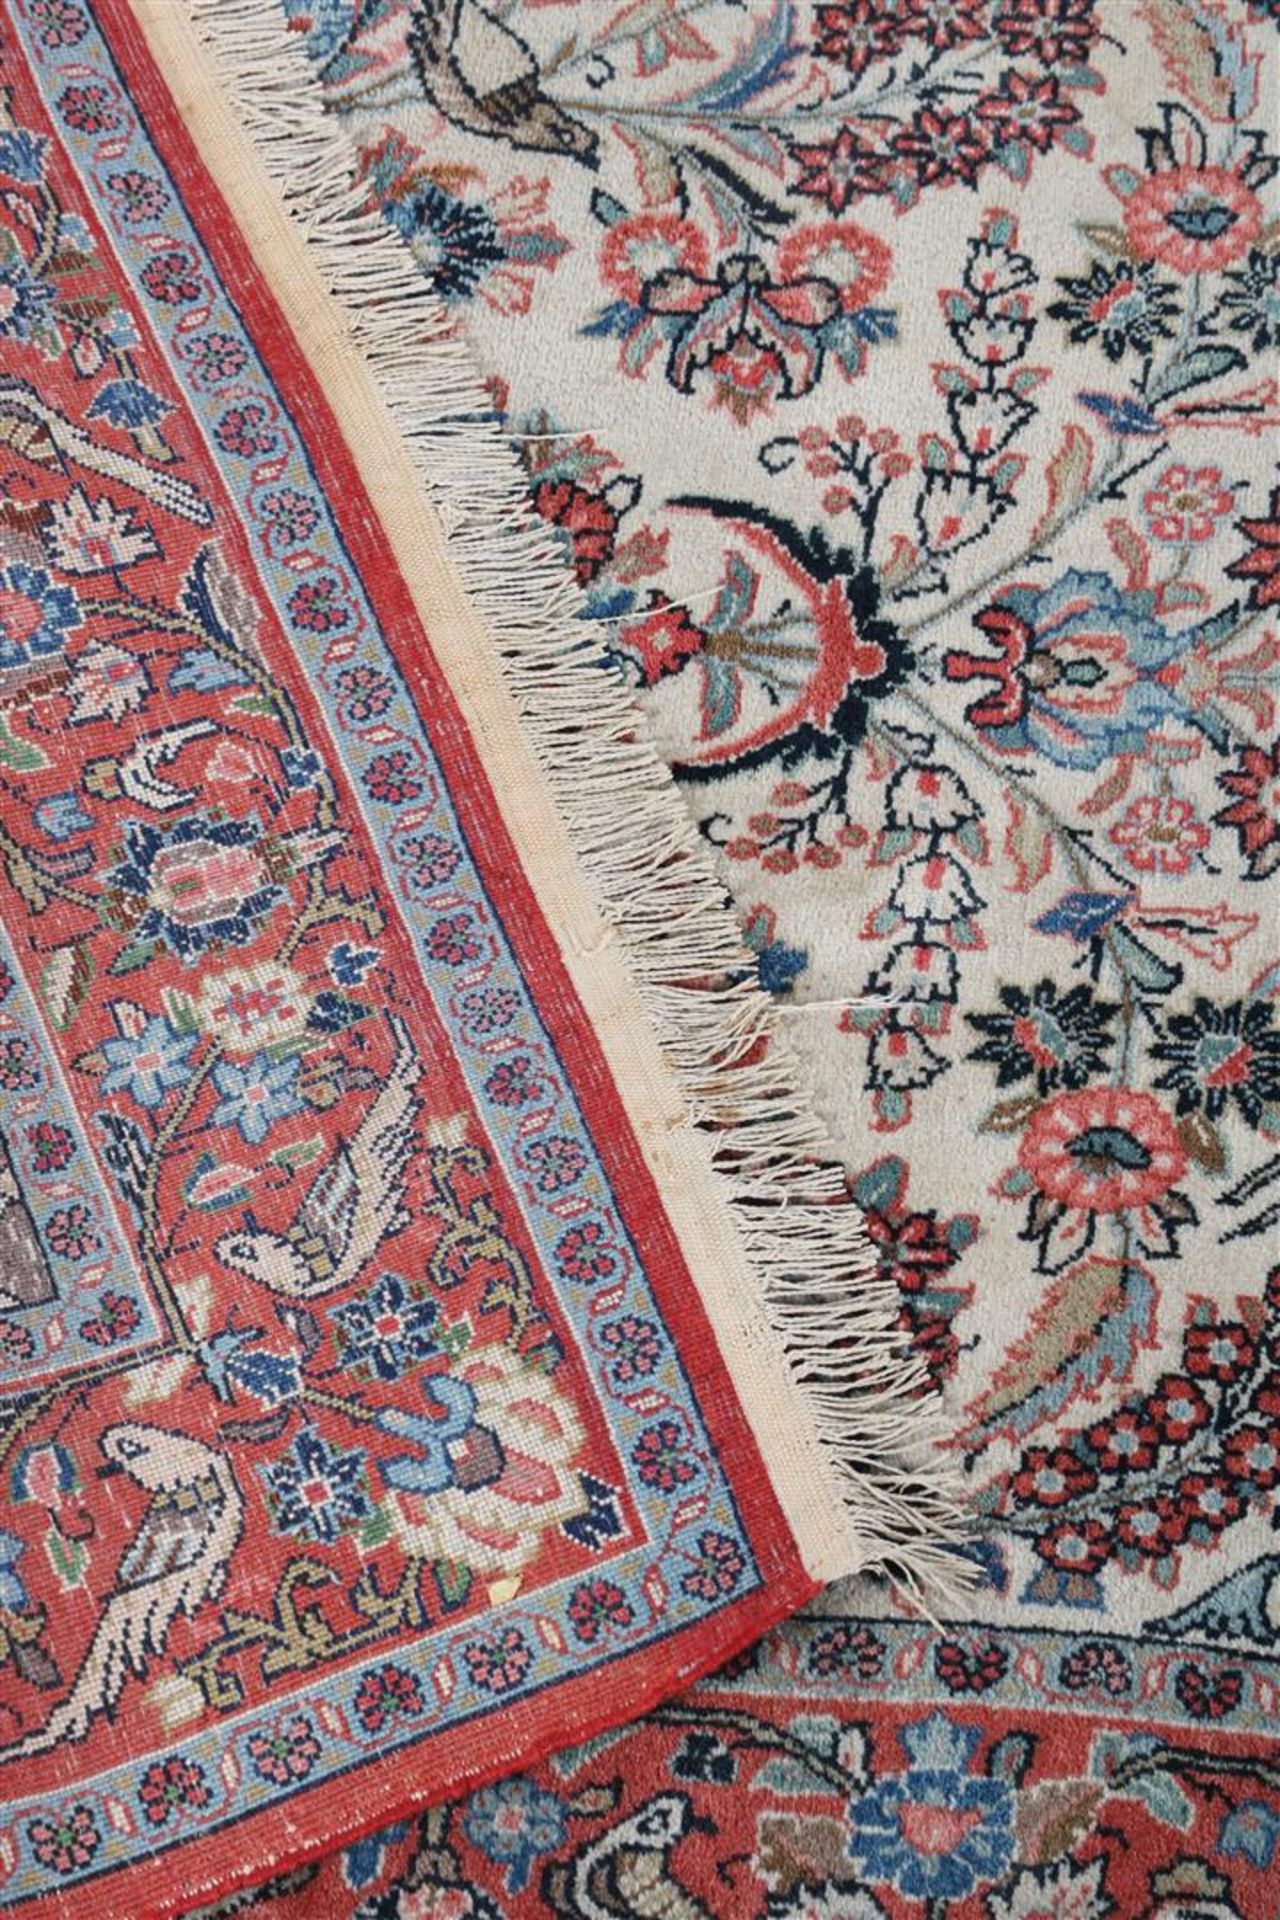 Hand-knotted Ispahan carpet - Image 5 of 5